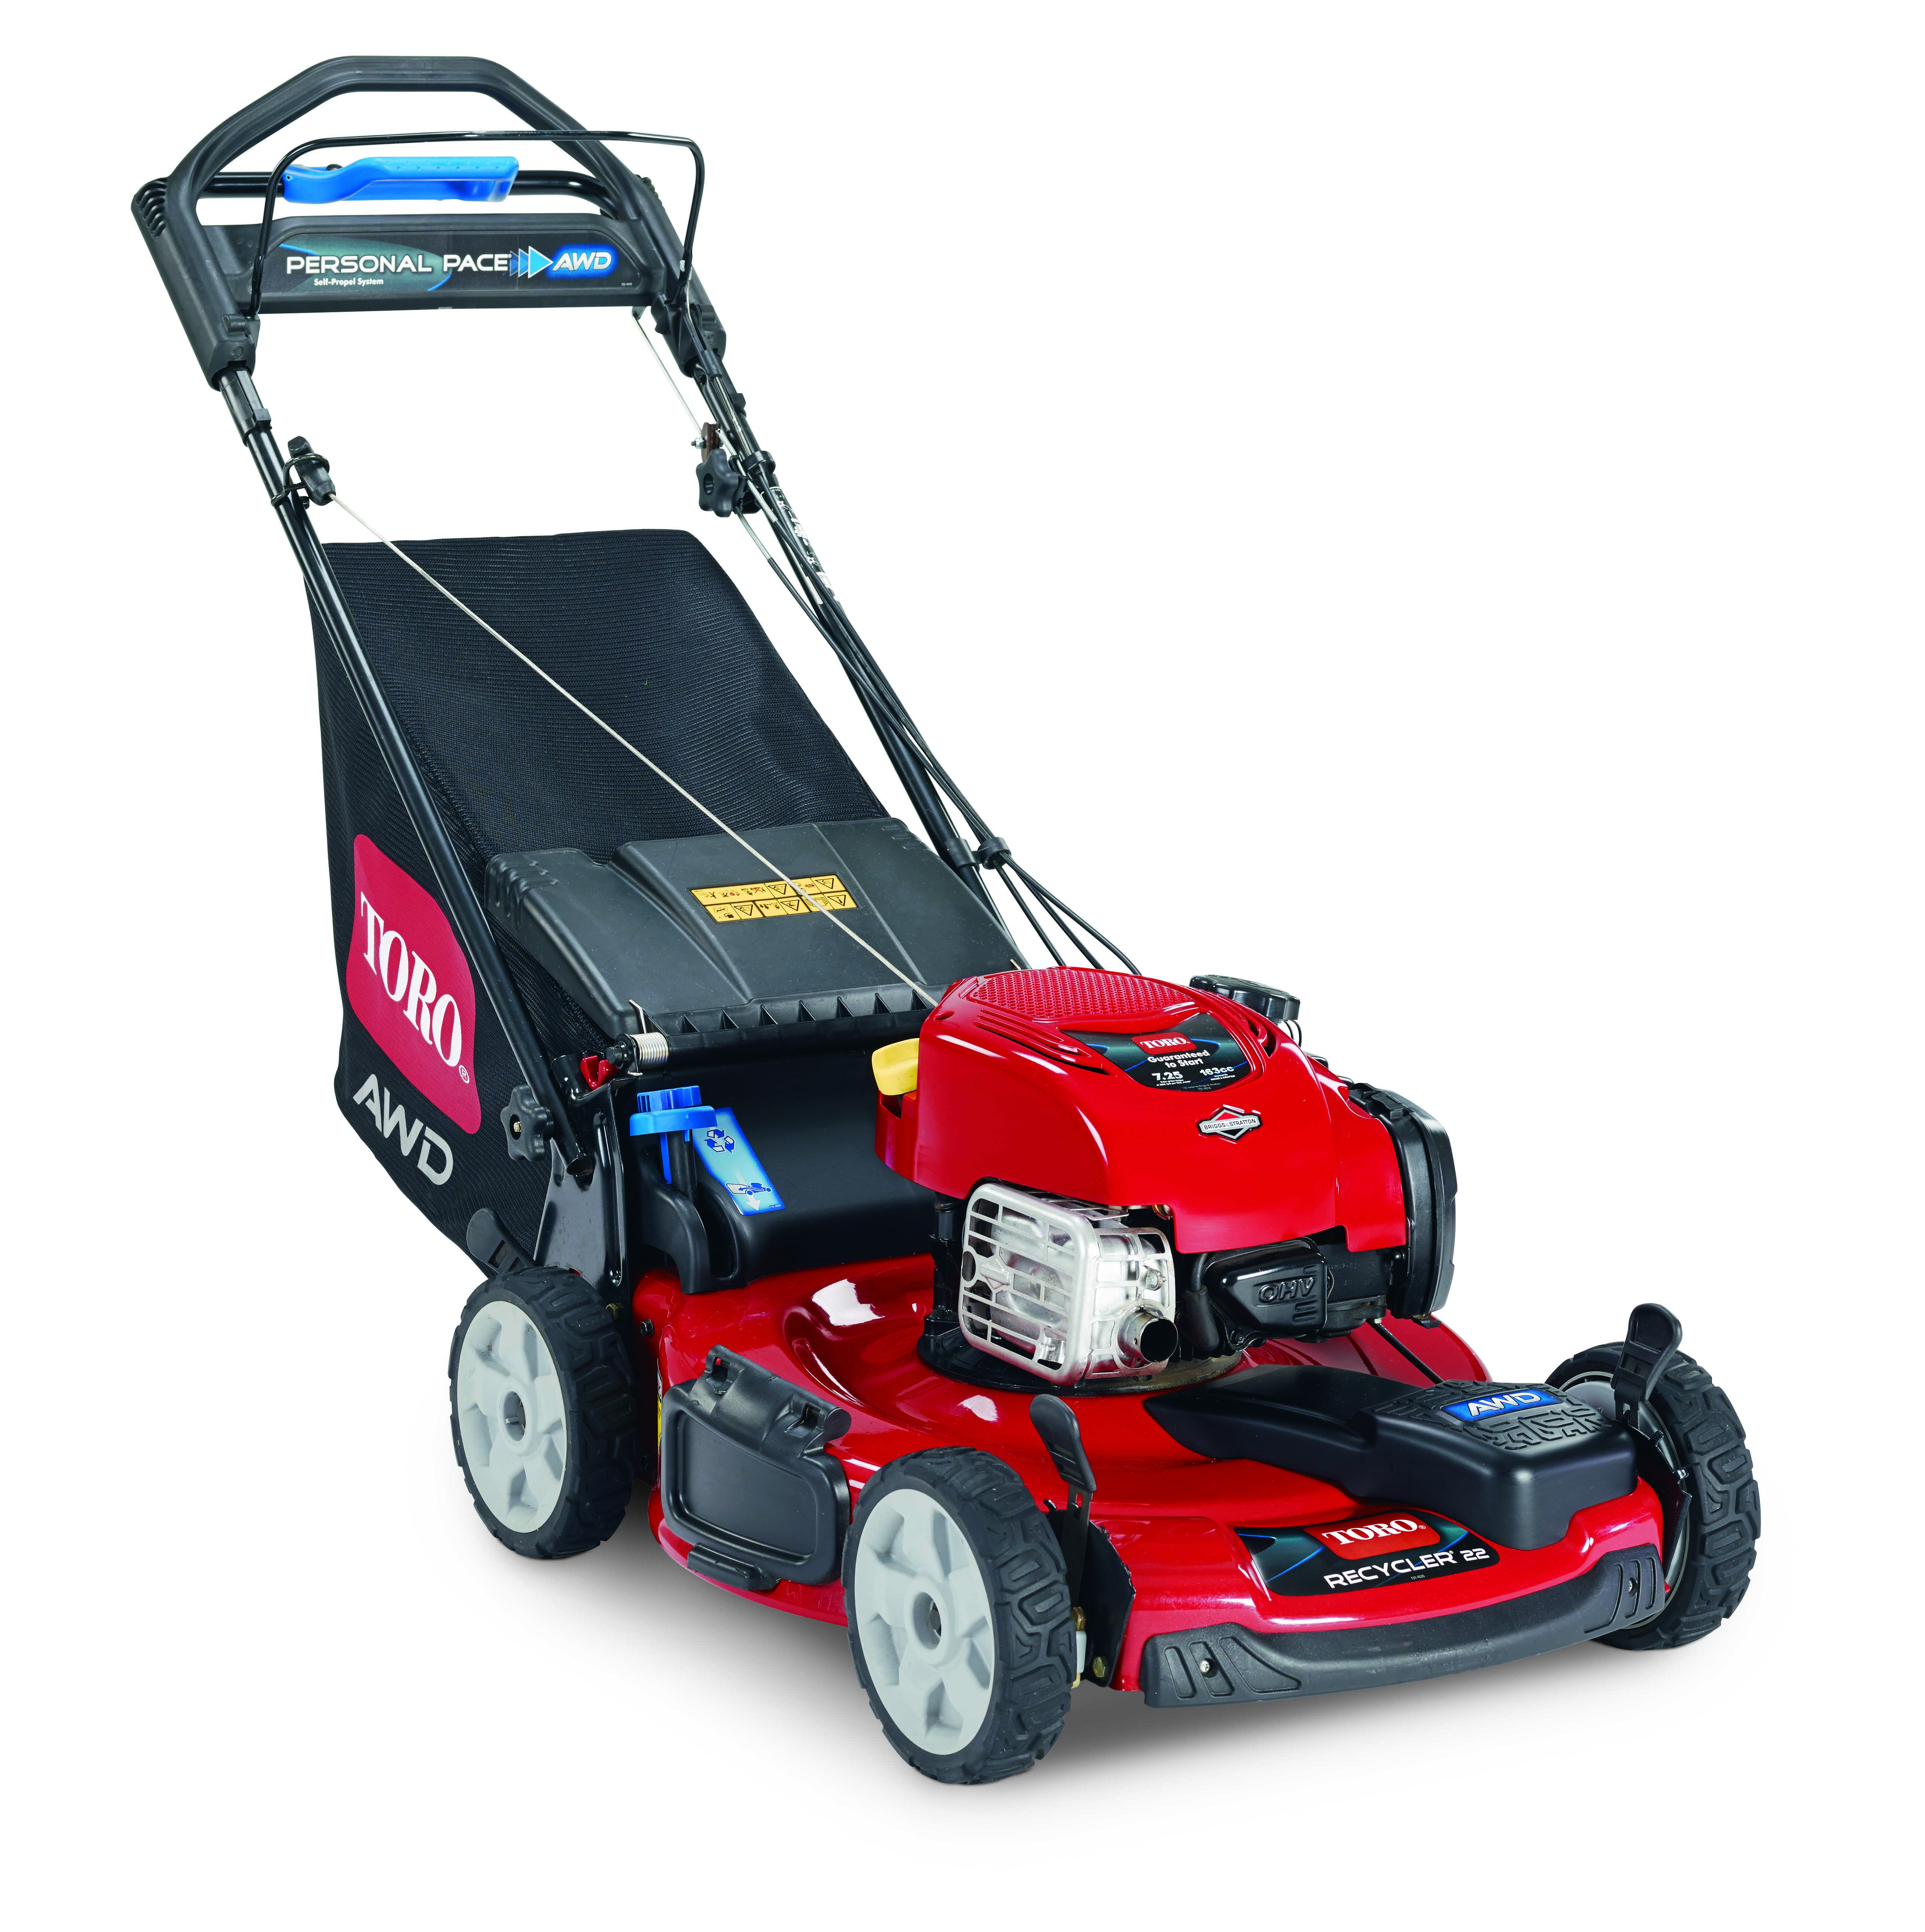 lawn-world-toro-adds-all-wheel-drive-to-recycler-push-mower-line-up